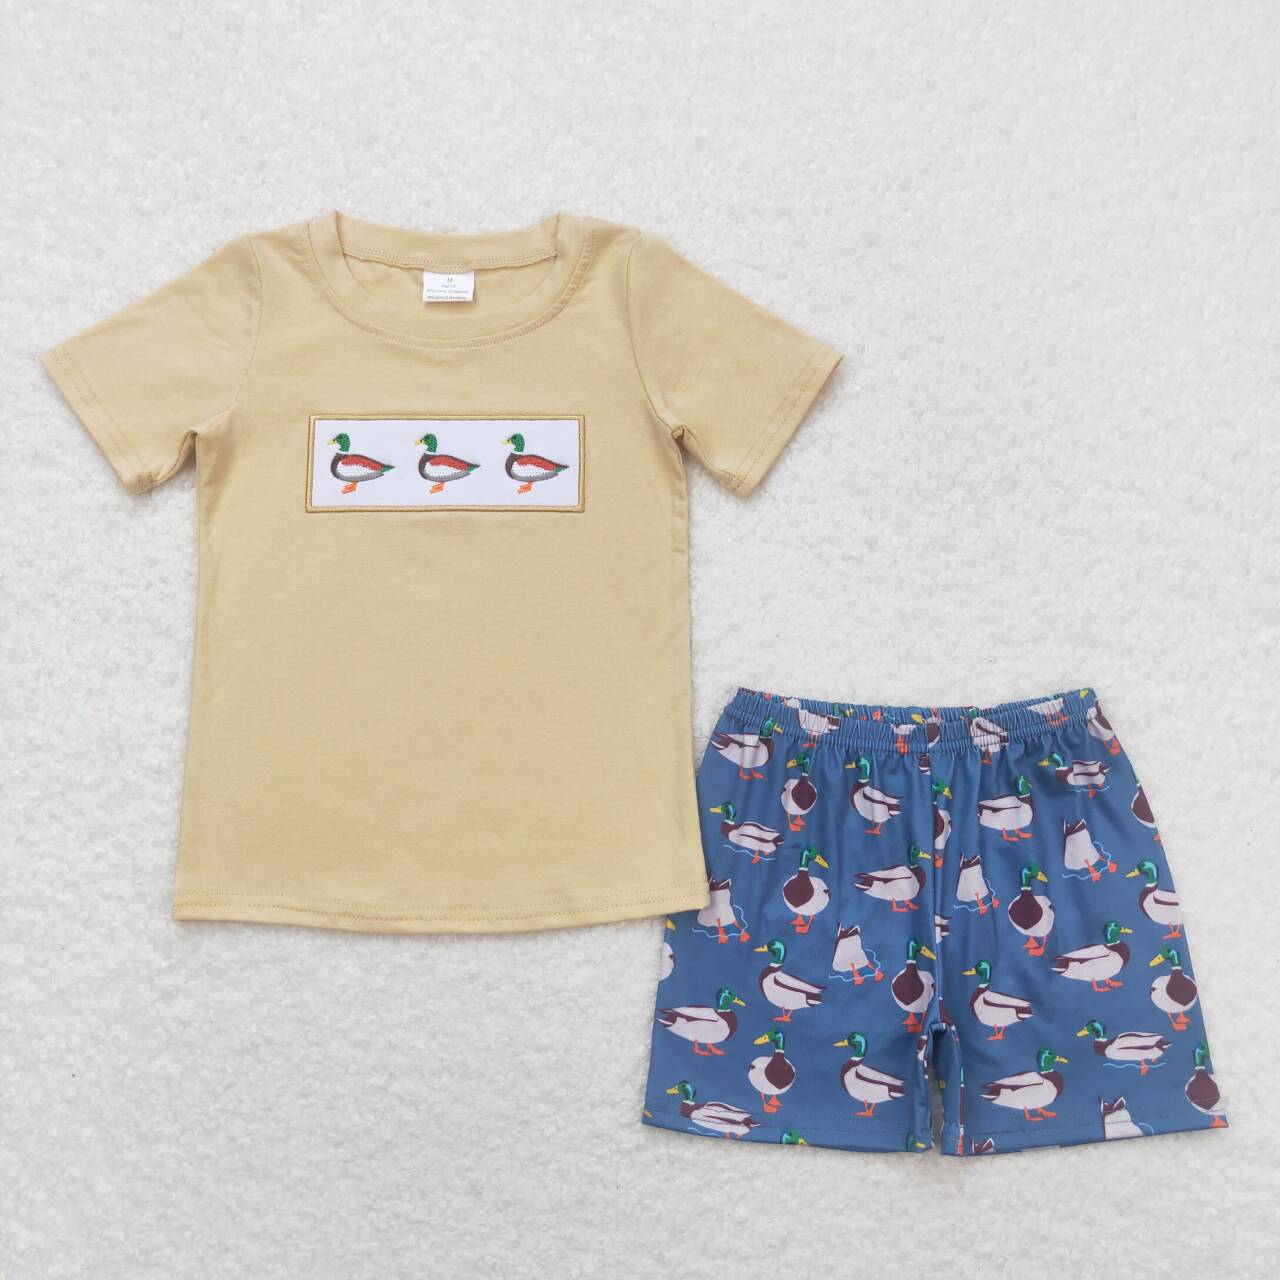 BSSO0645 Duck Embroidery Top Boys Summer Clothes Set